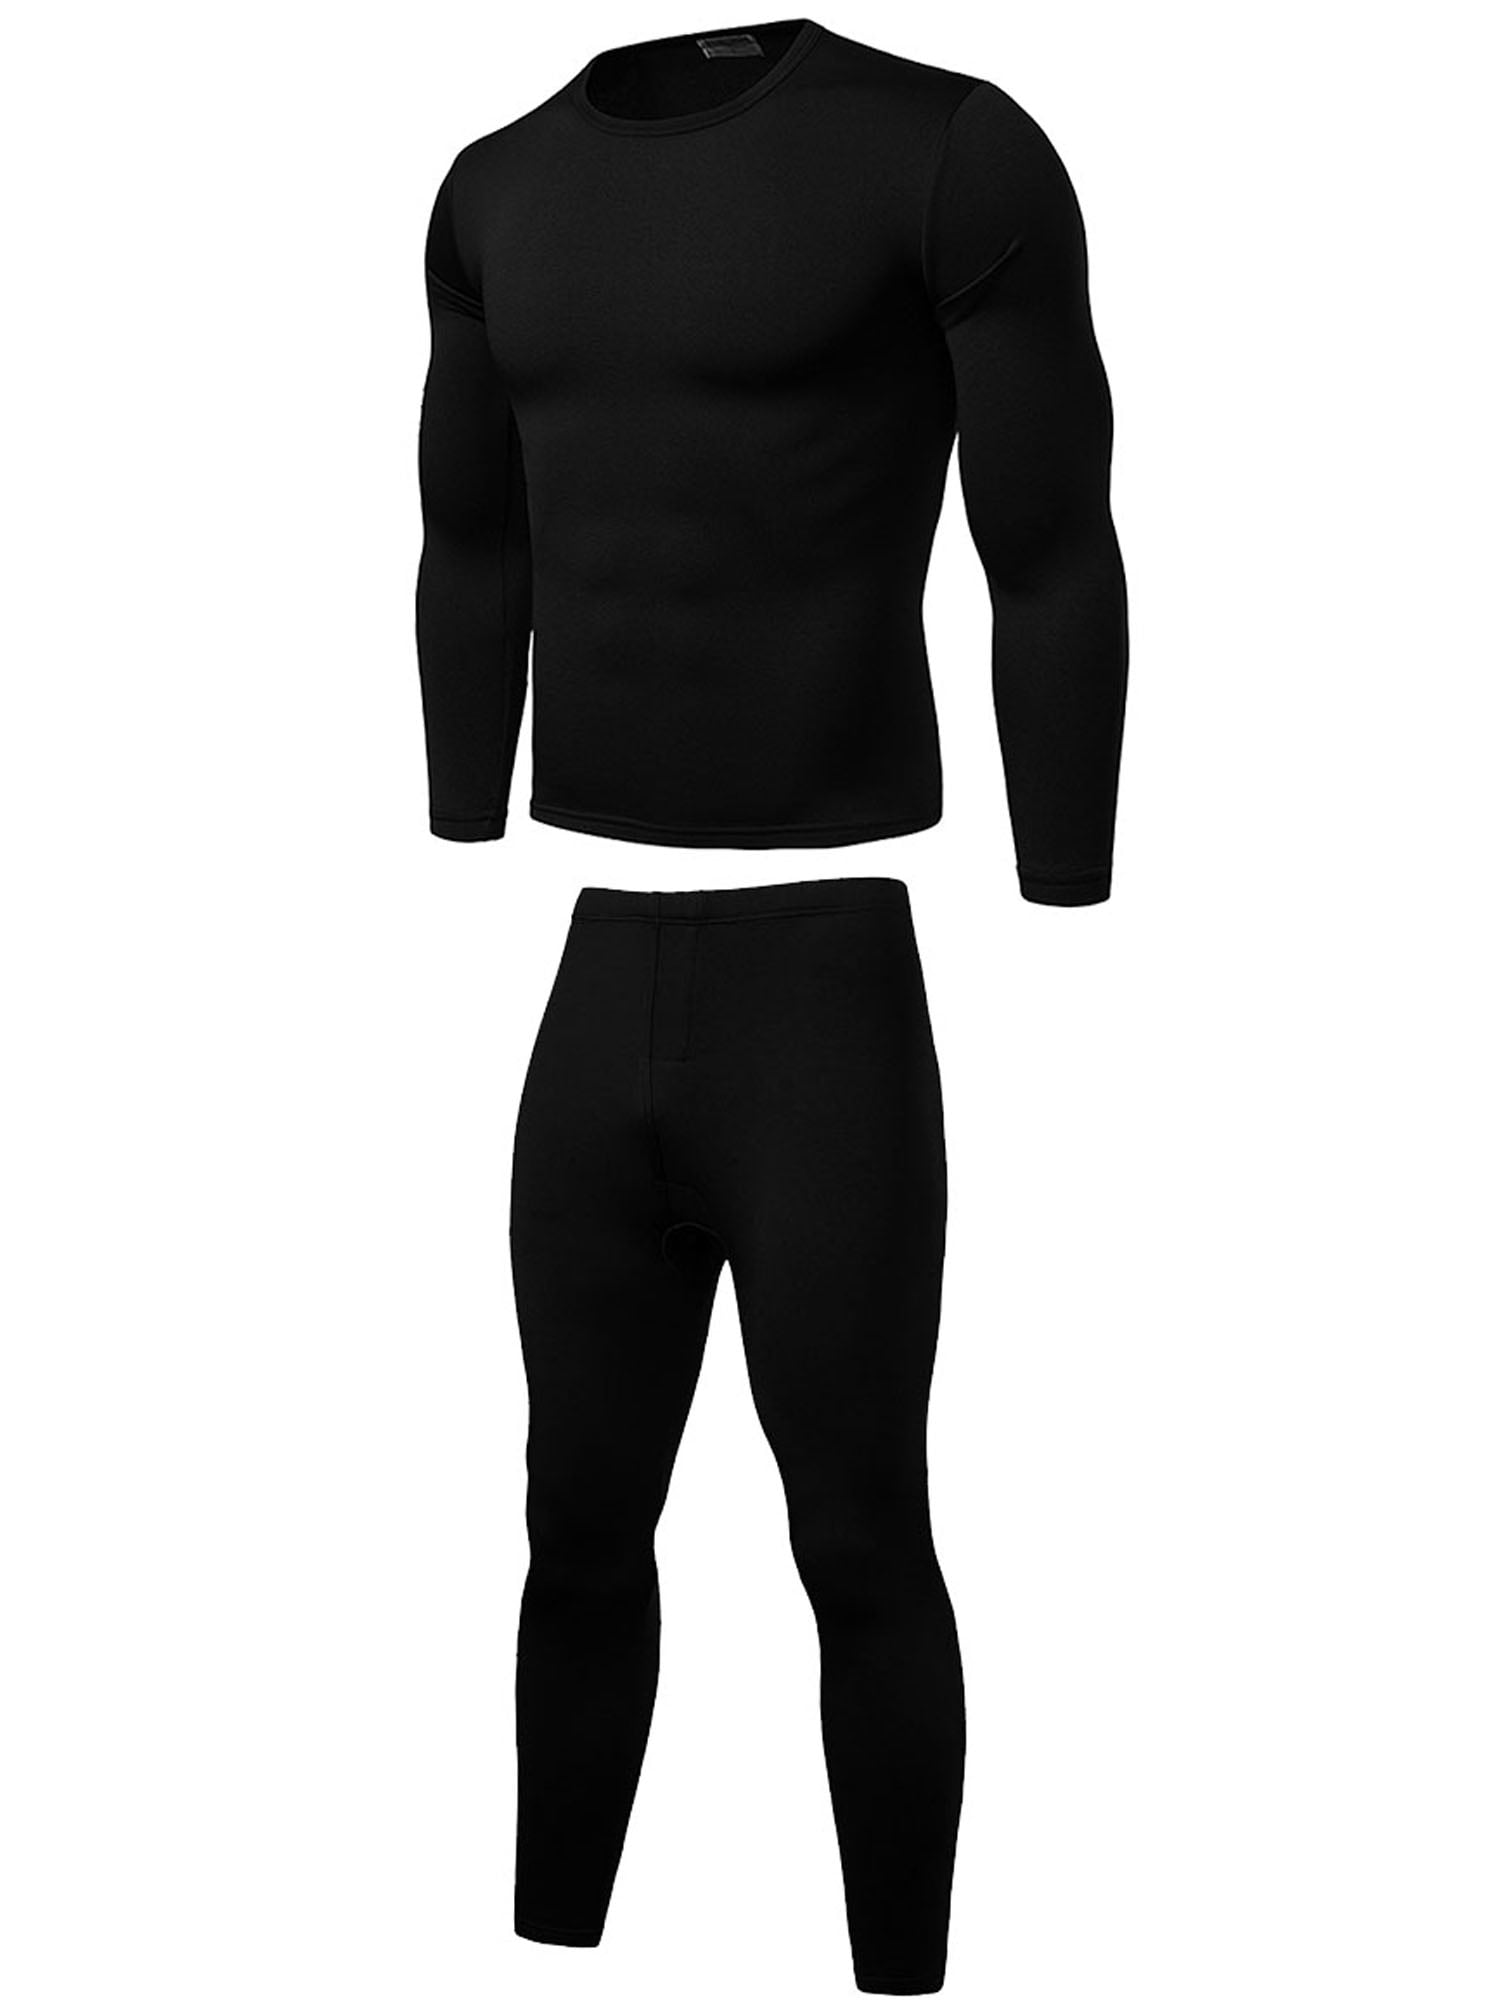 HEROBIKER Mens Thermal Underwear Set Skiing Winter Warm Base Layers Tight Long  Johns Top & Bottom Set with Fleece Lined Black - ShopStyle Activewear